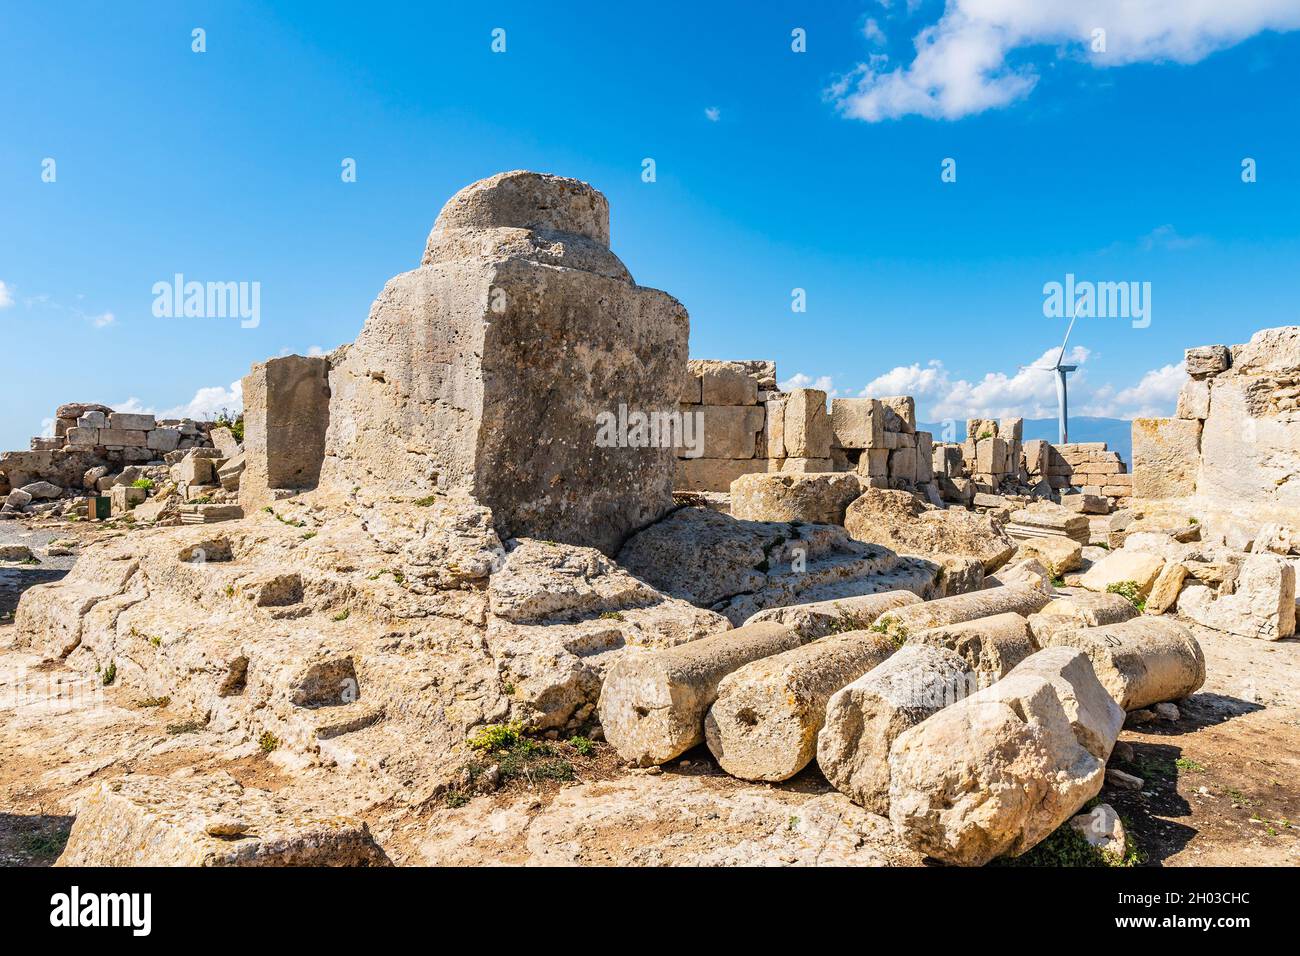 Hayat Saint Simon Monastery Breathtaking Picturesque View on a Blue Sky Day in Summer Stock Photo